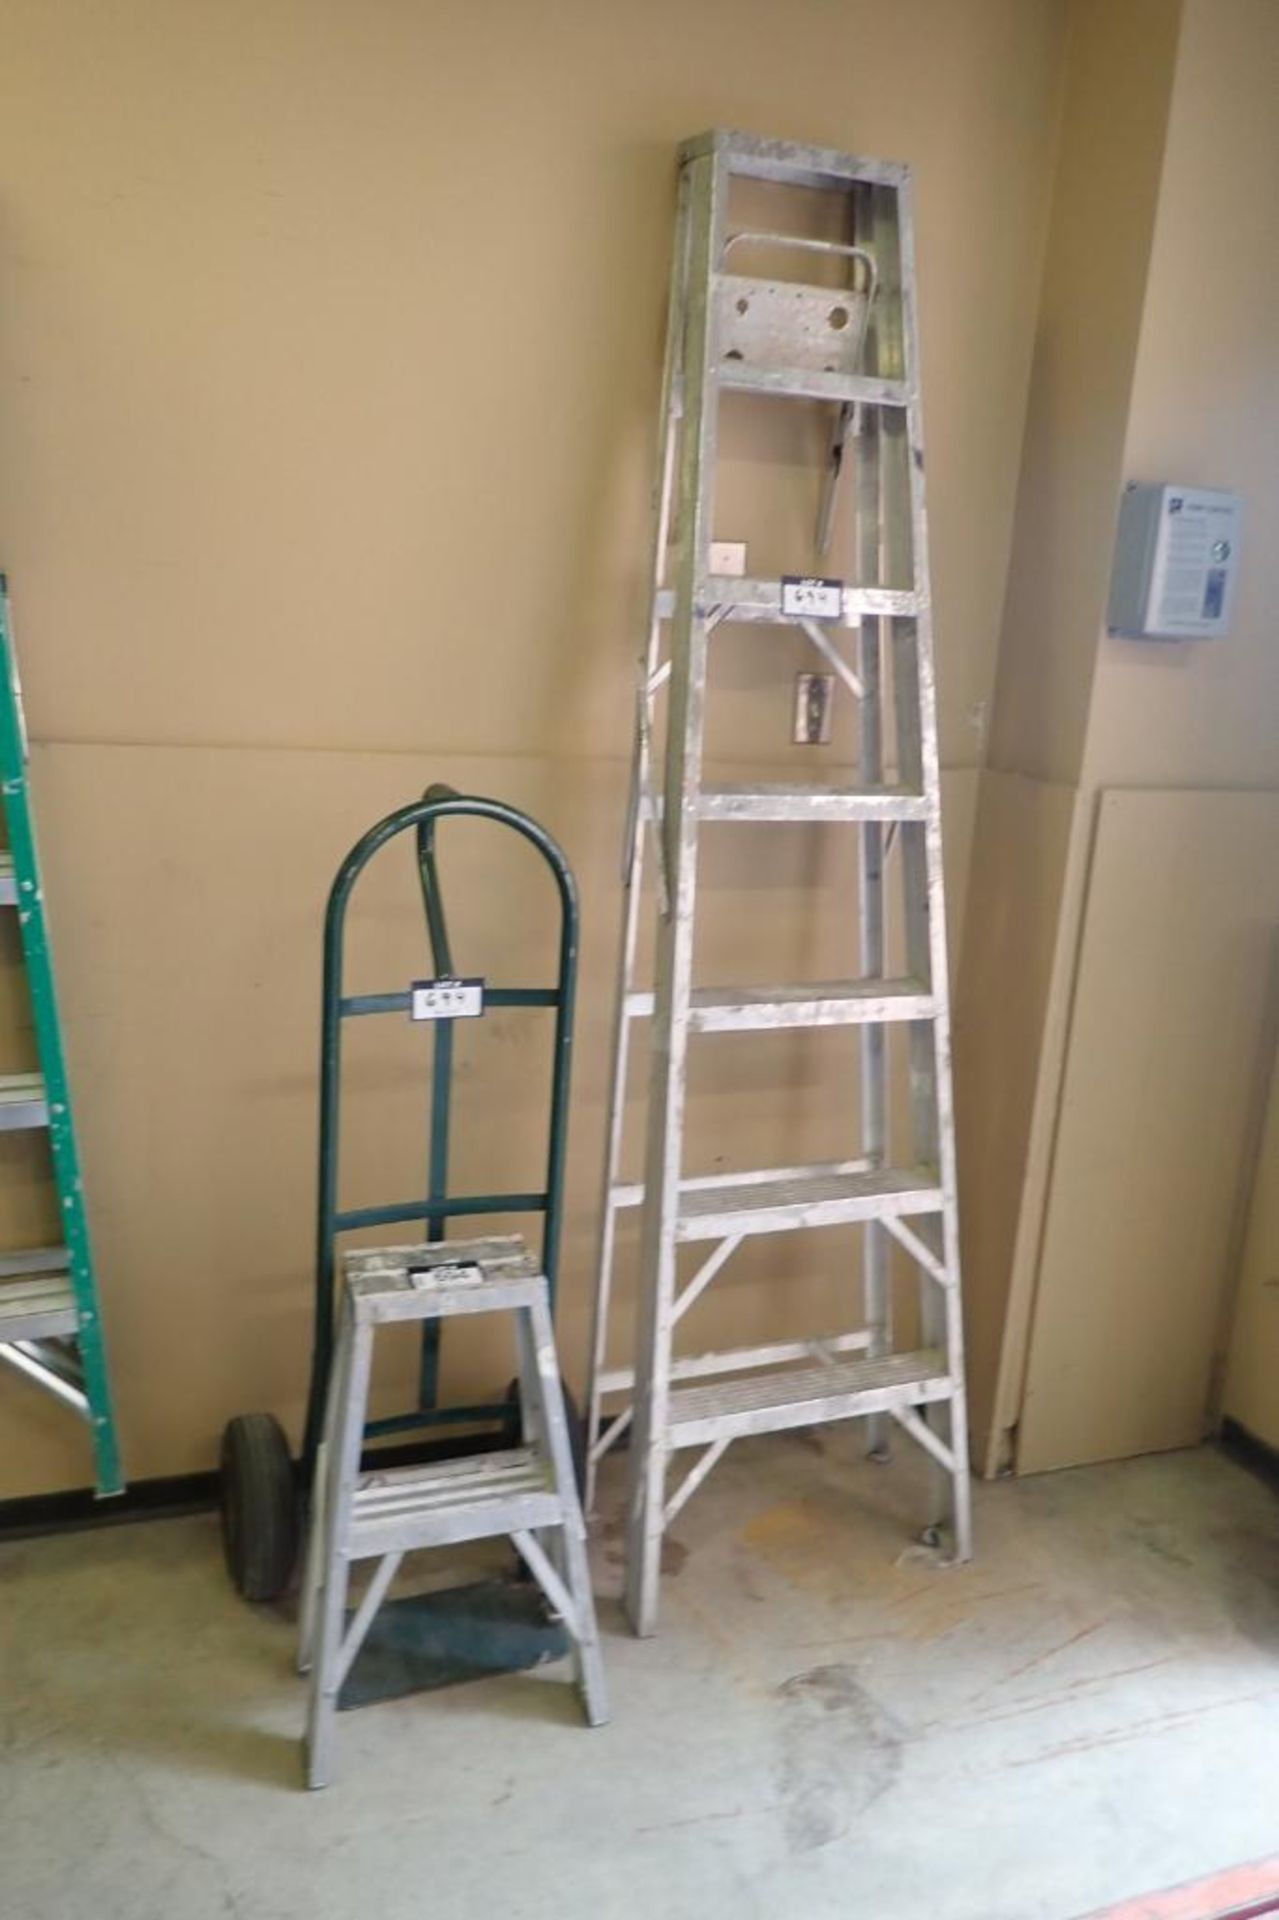 Lot of Aluminum 6' Step Ladder, 2' Step Ladder and 2-Wheel Hand Truck.